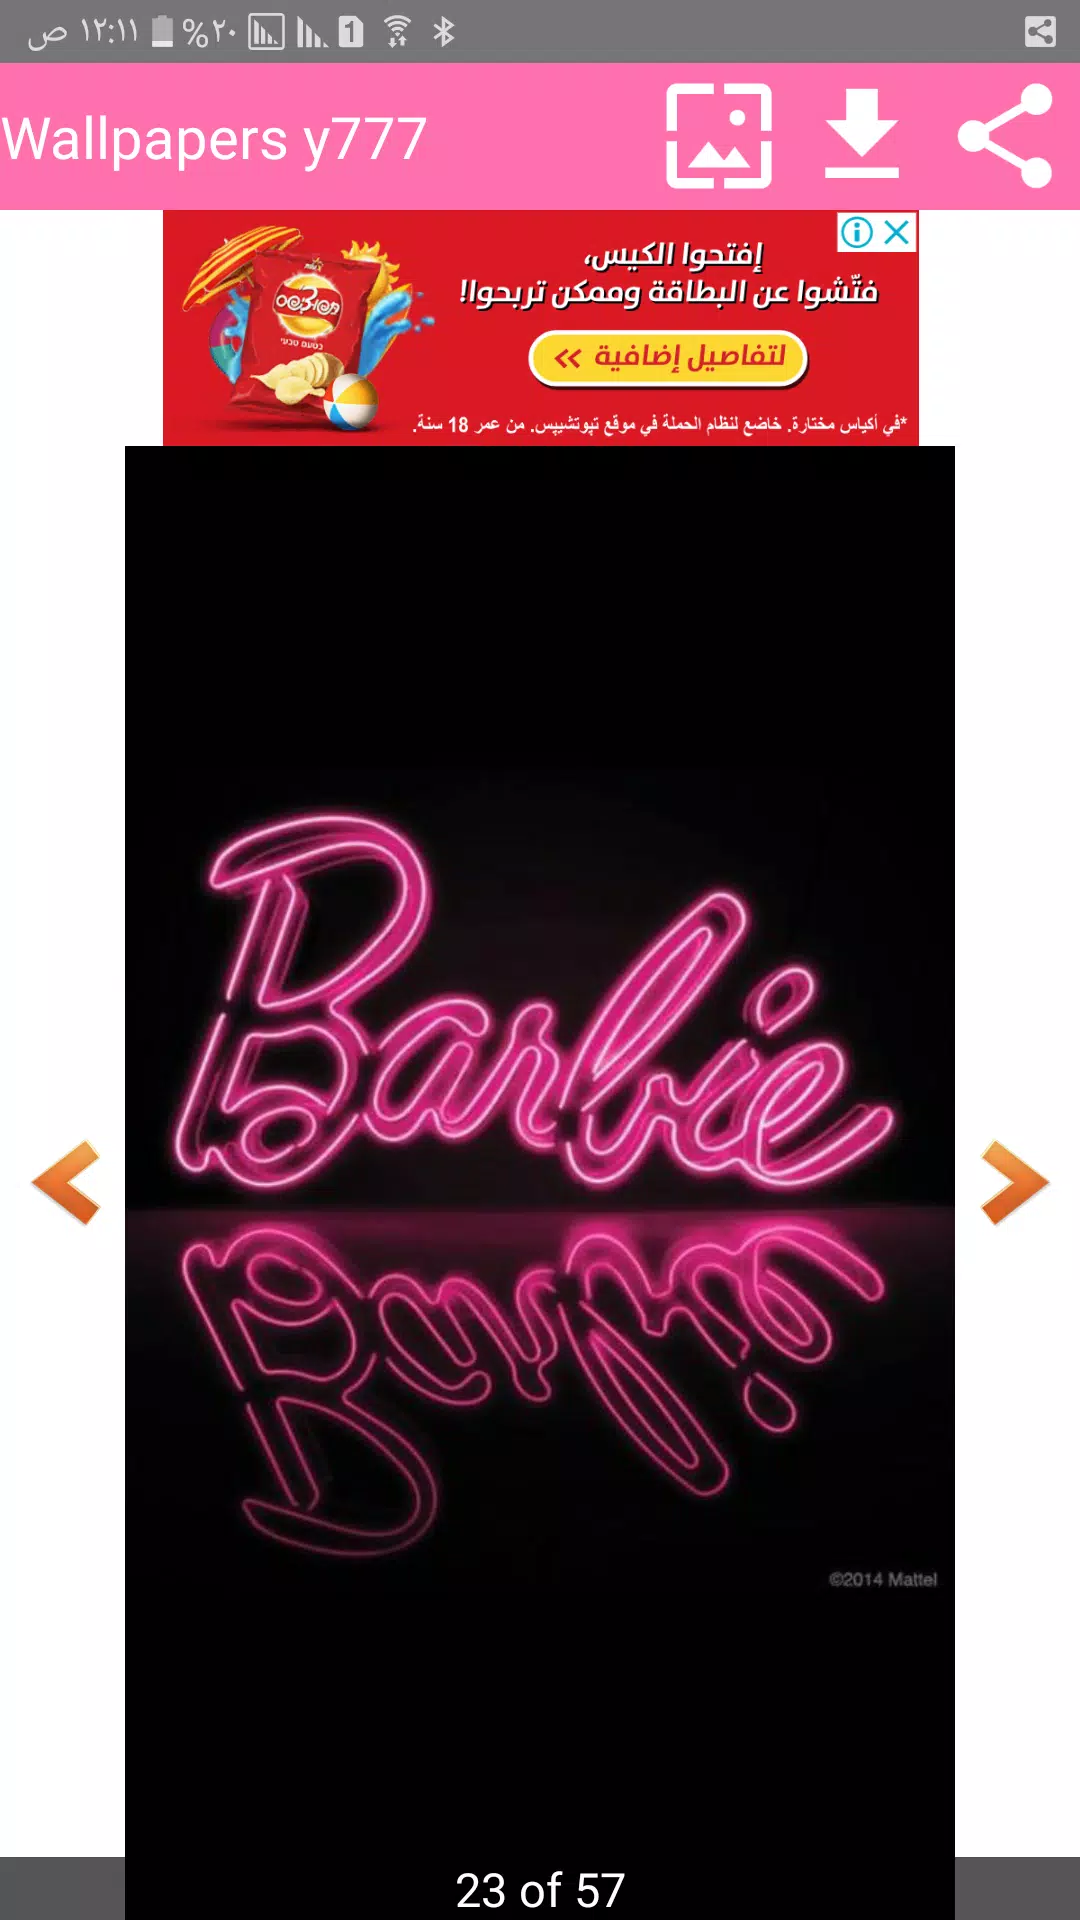 barbie wallpaper for phone for Android - APK Download